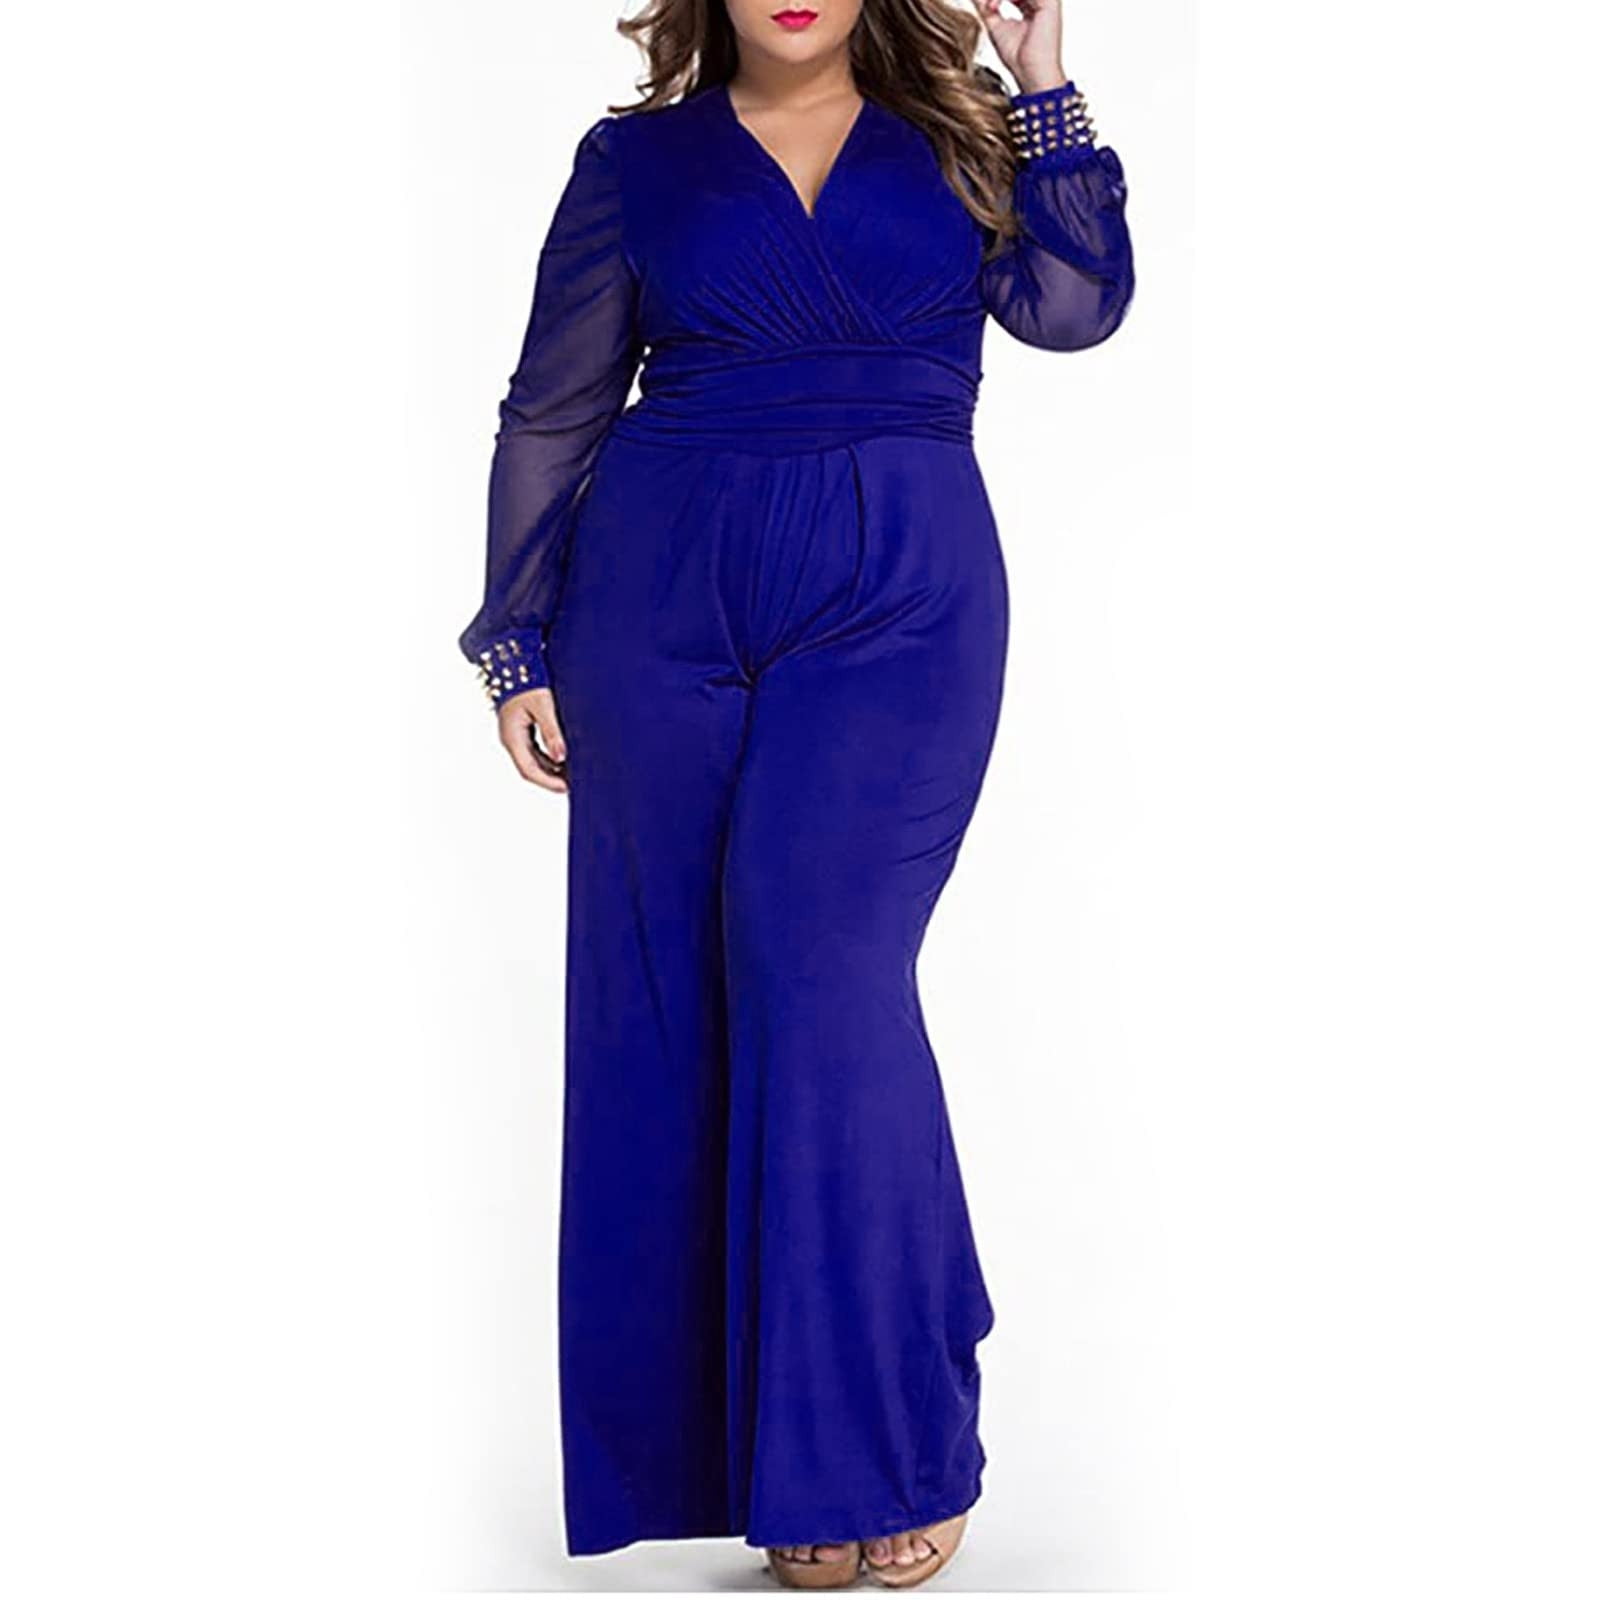 Royal Blue Satin Jumpsuit With High Collar And Long Sleeves For